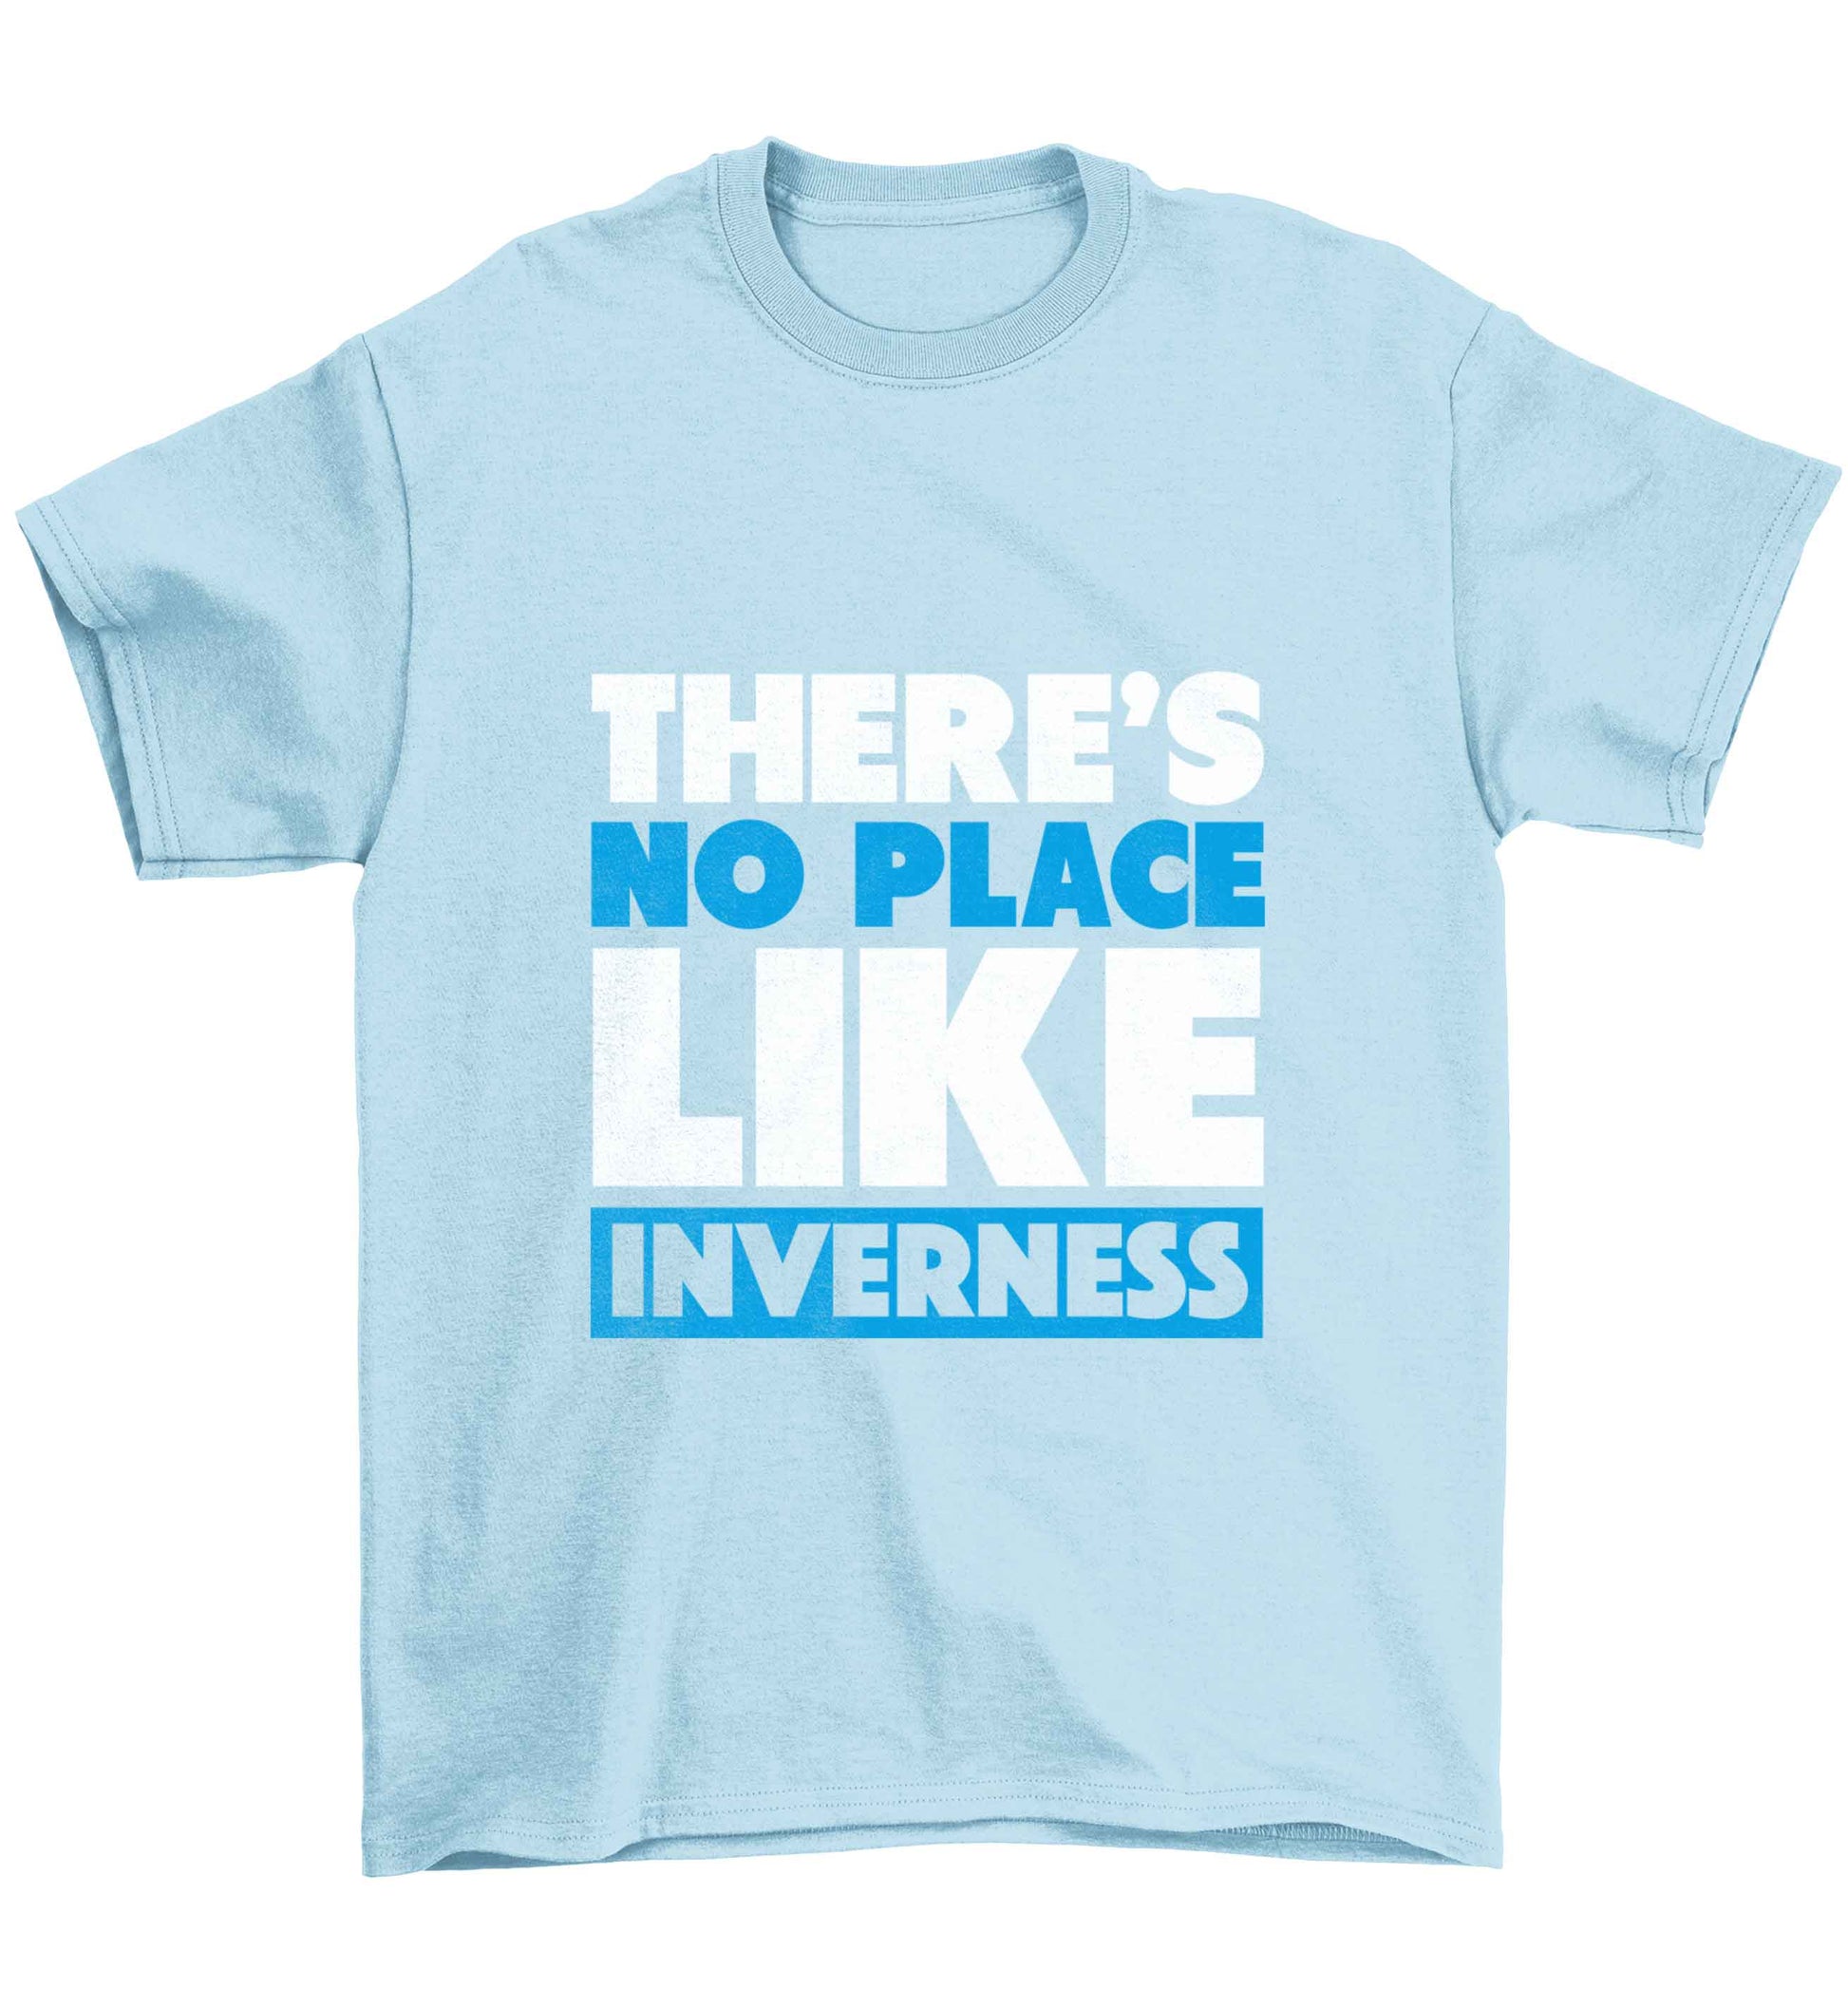 There's no place like Inverness Children's light blue Tshirt 12-13 Years